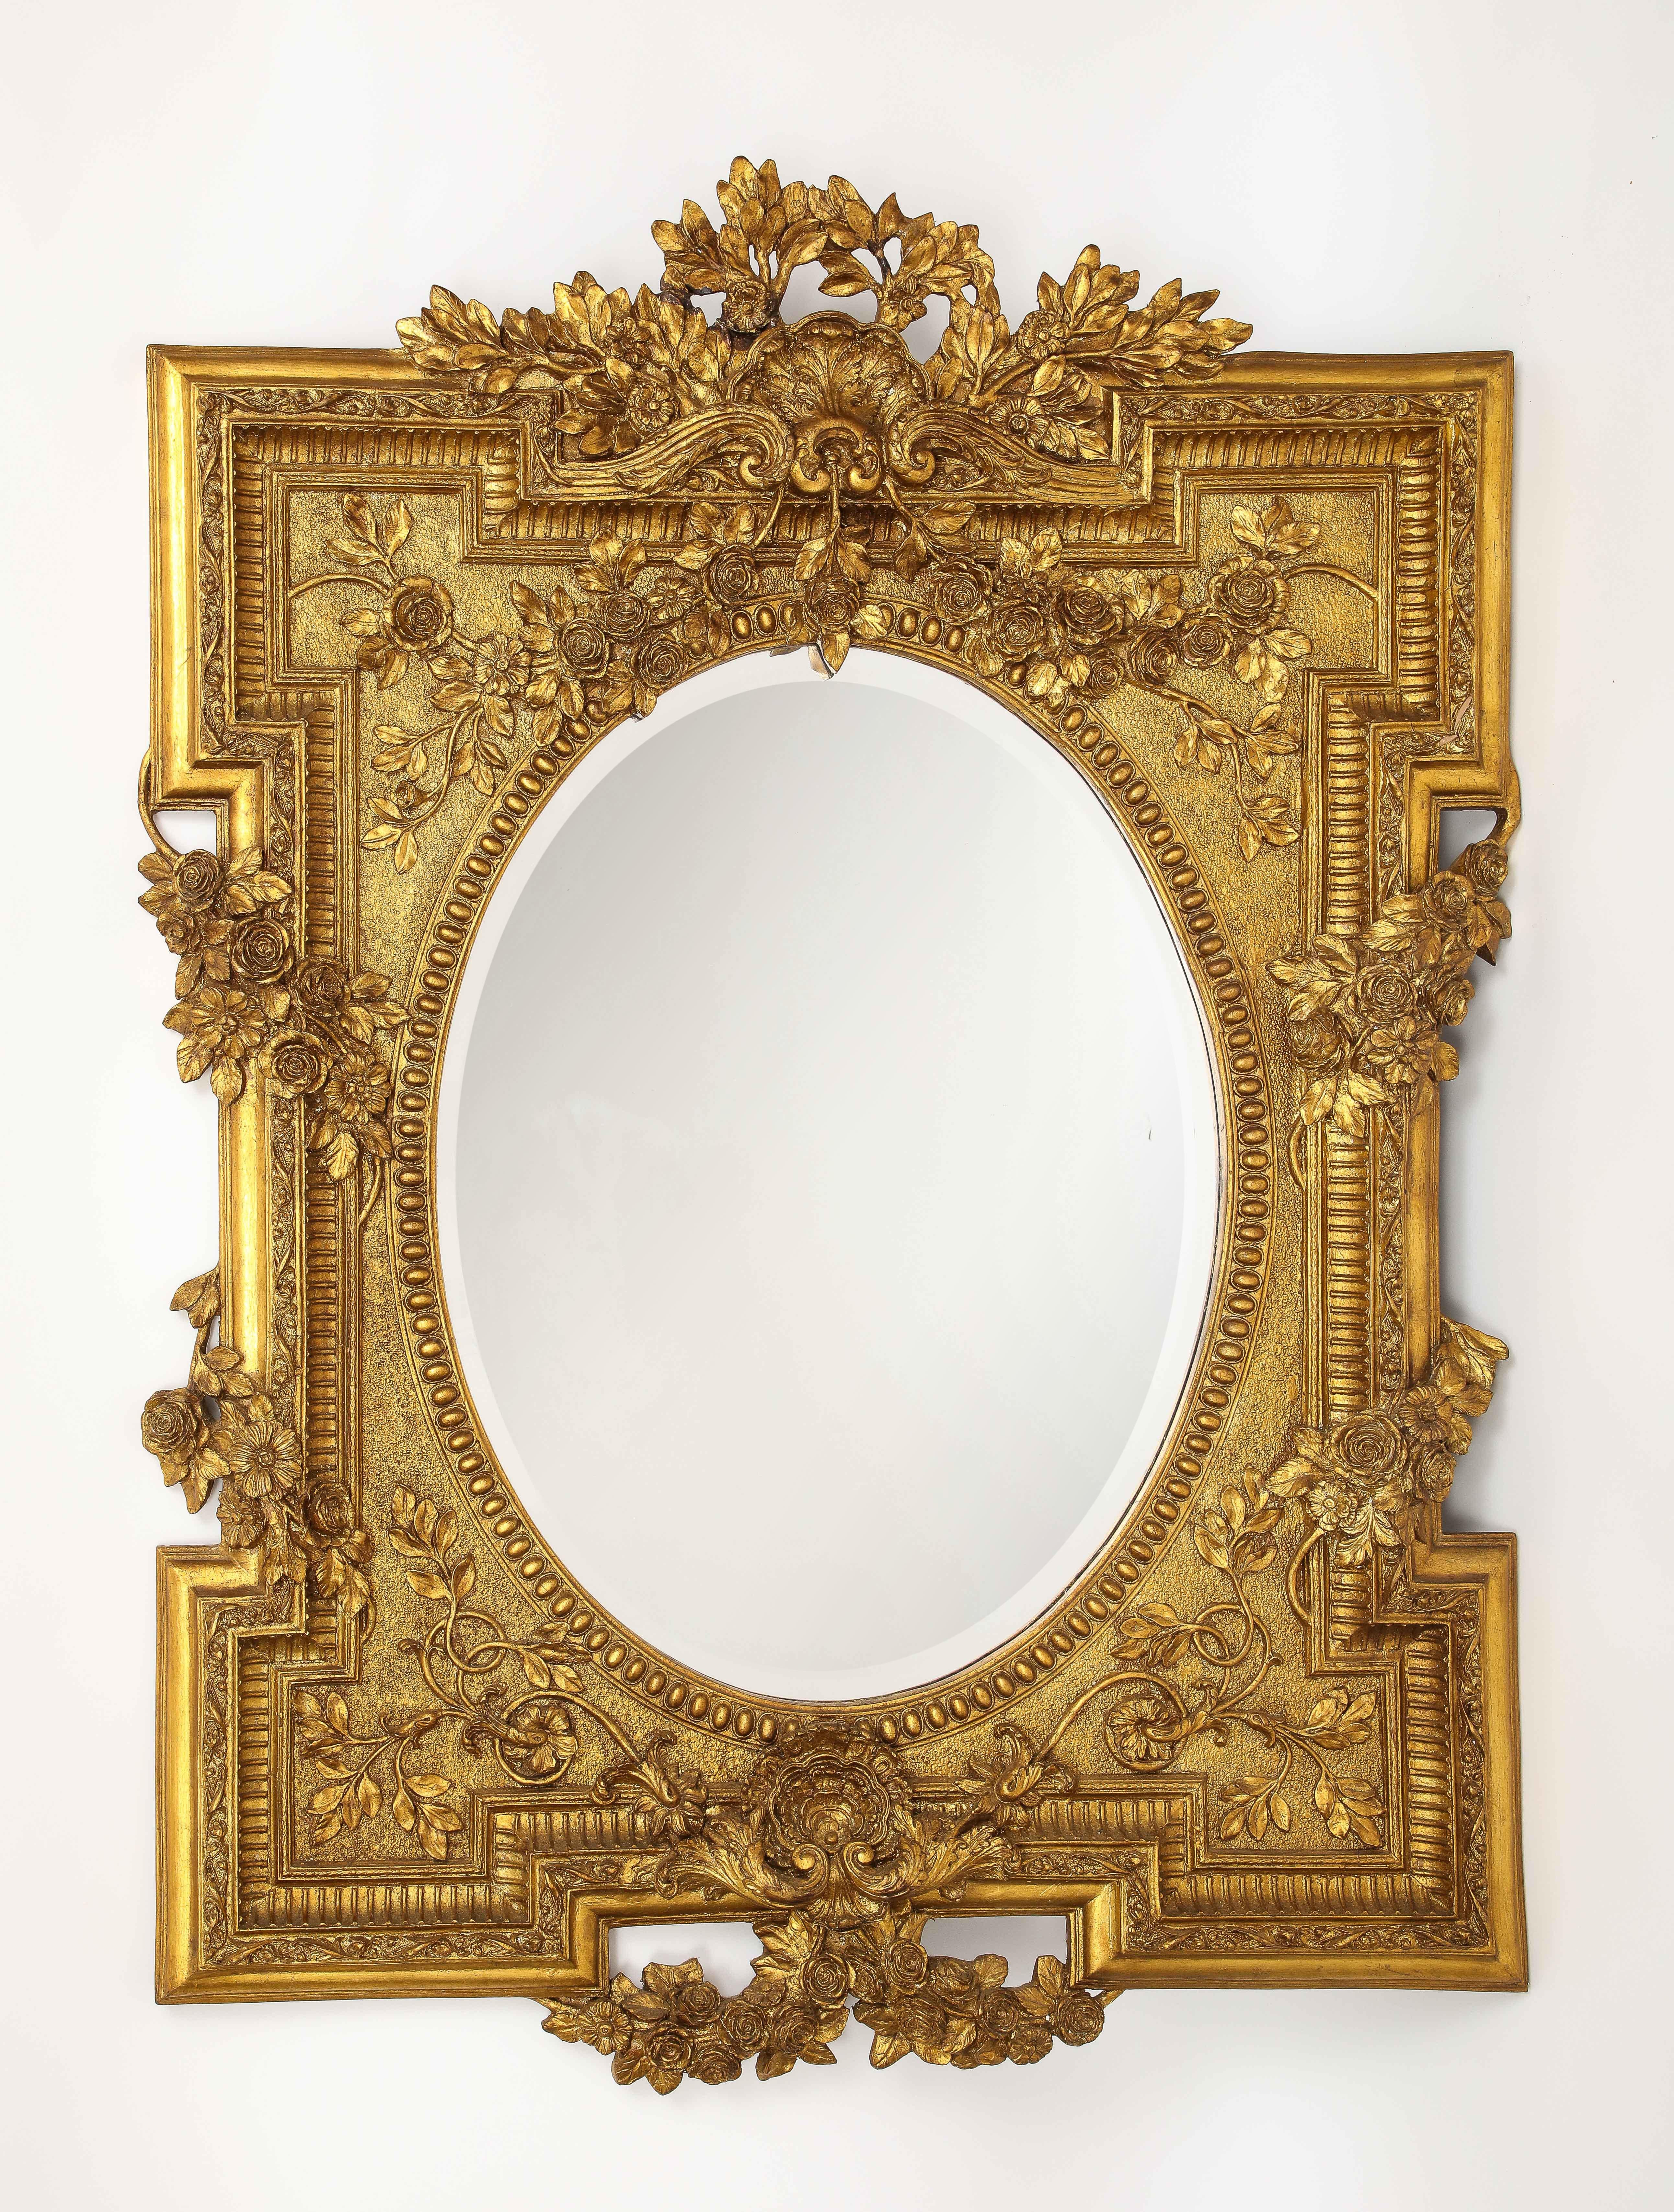 A Marvelous French 1950's Giltwood Louis XVI Style Hand-Carved beveled mirror with Floral Vine Designs. The giltwood frame is magnificently hand-carved and beautifully gilt with 24K gold. The quality and intricacy of this mirror is marvelous with